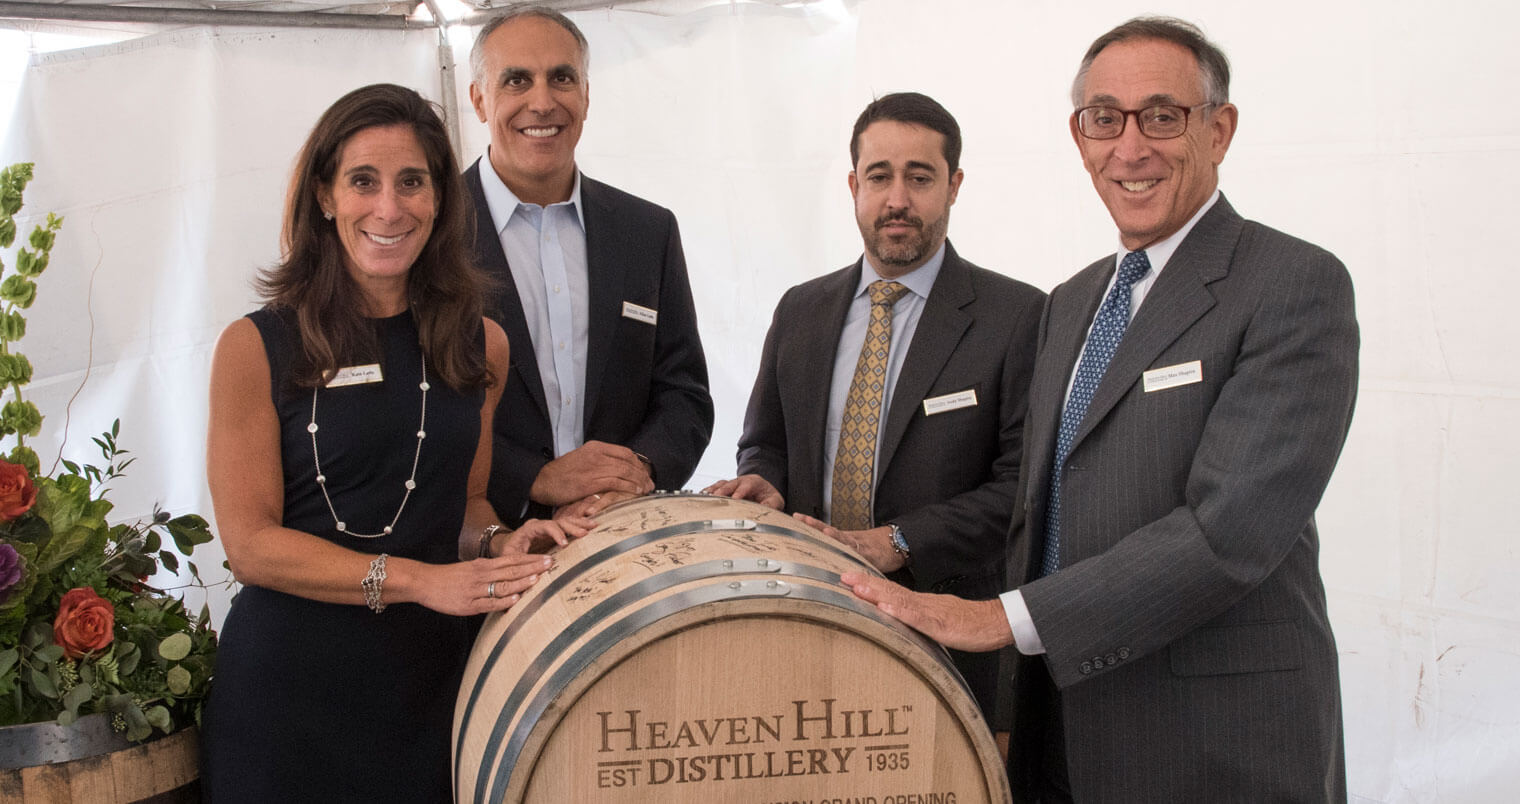 Heaven Hill Distillery Dedicates Largest Single-Site Bourbon Distillery in American Whiskey, featured image